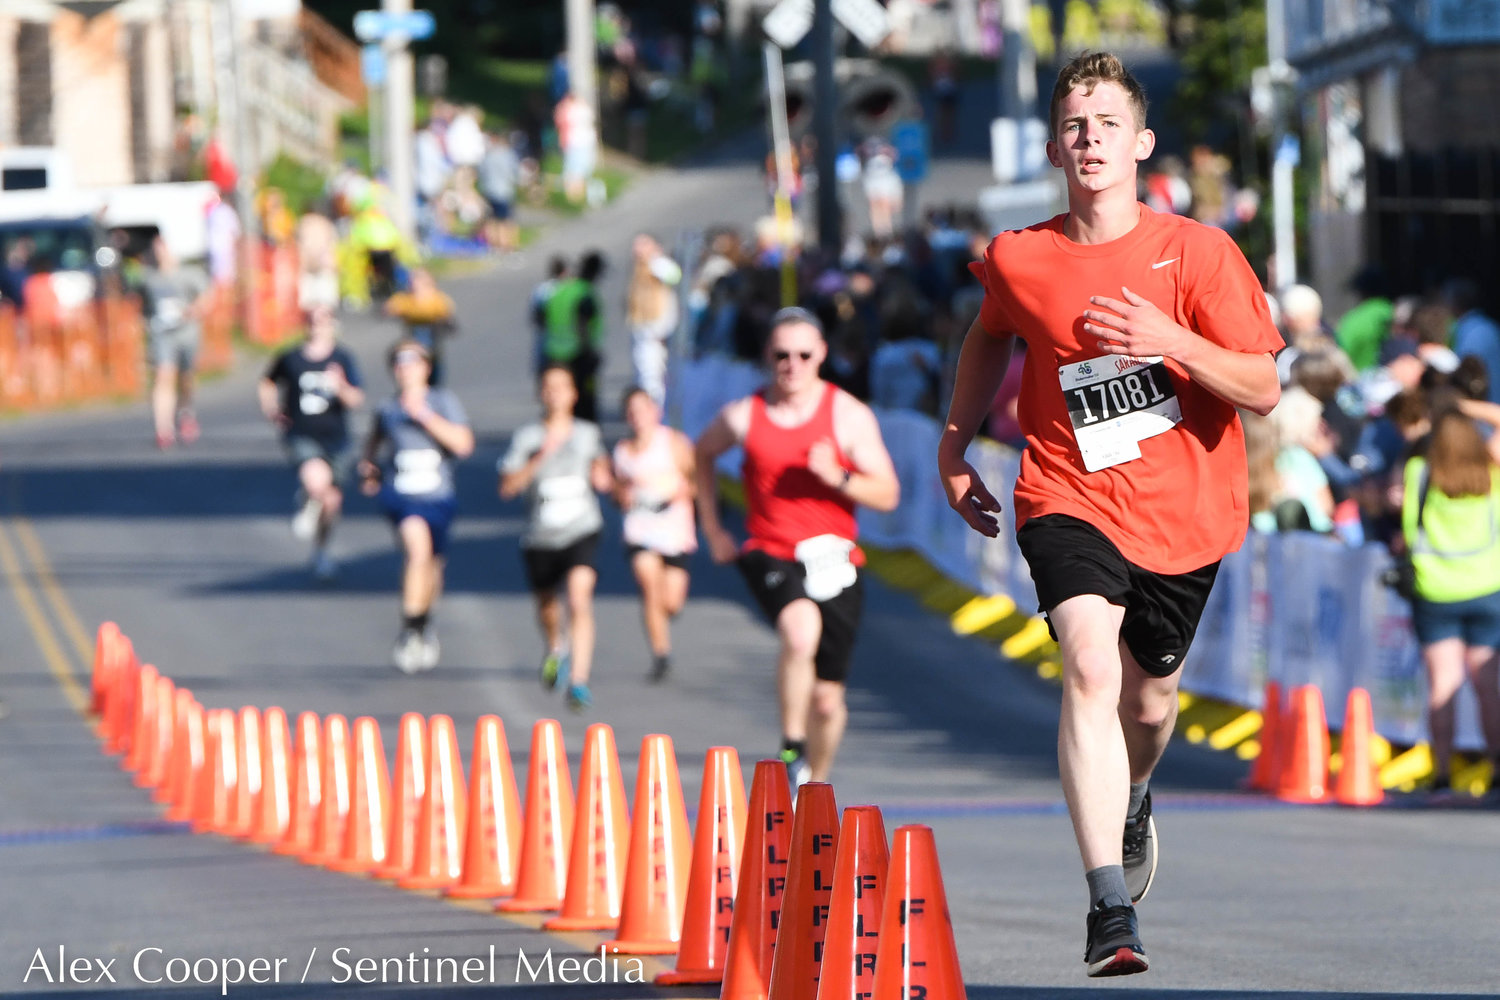 Cold Brook resident Carl Hindley prepares to cross the finish line during the 5K race at the 45th Boilermaker Road Race on Sunday.